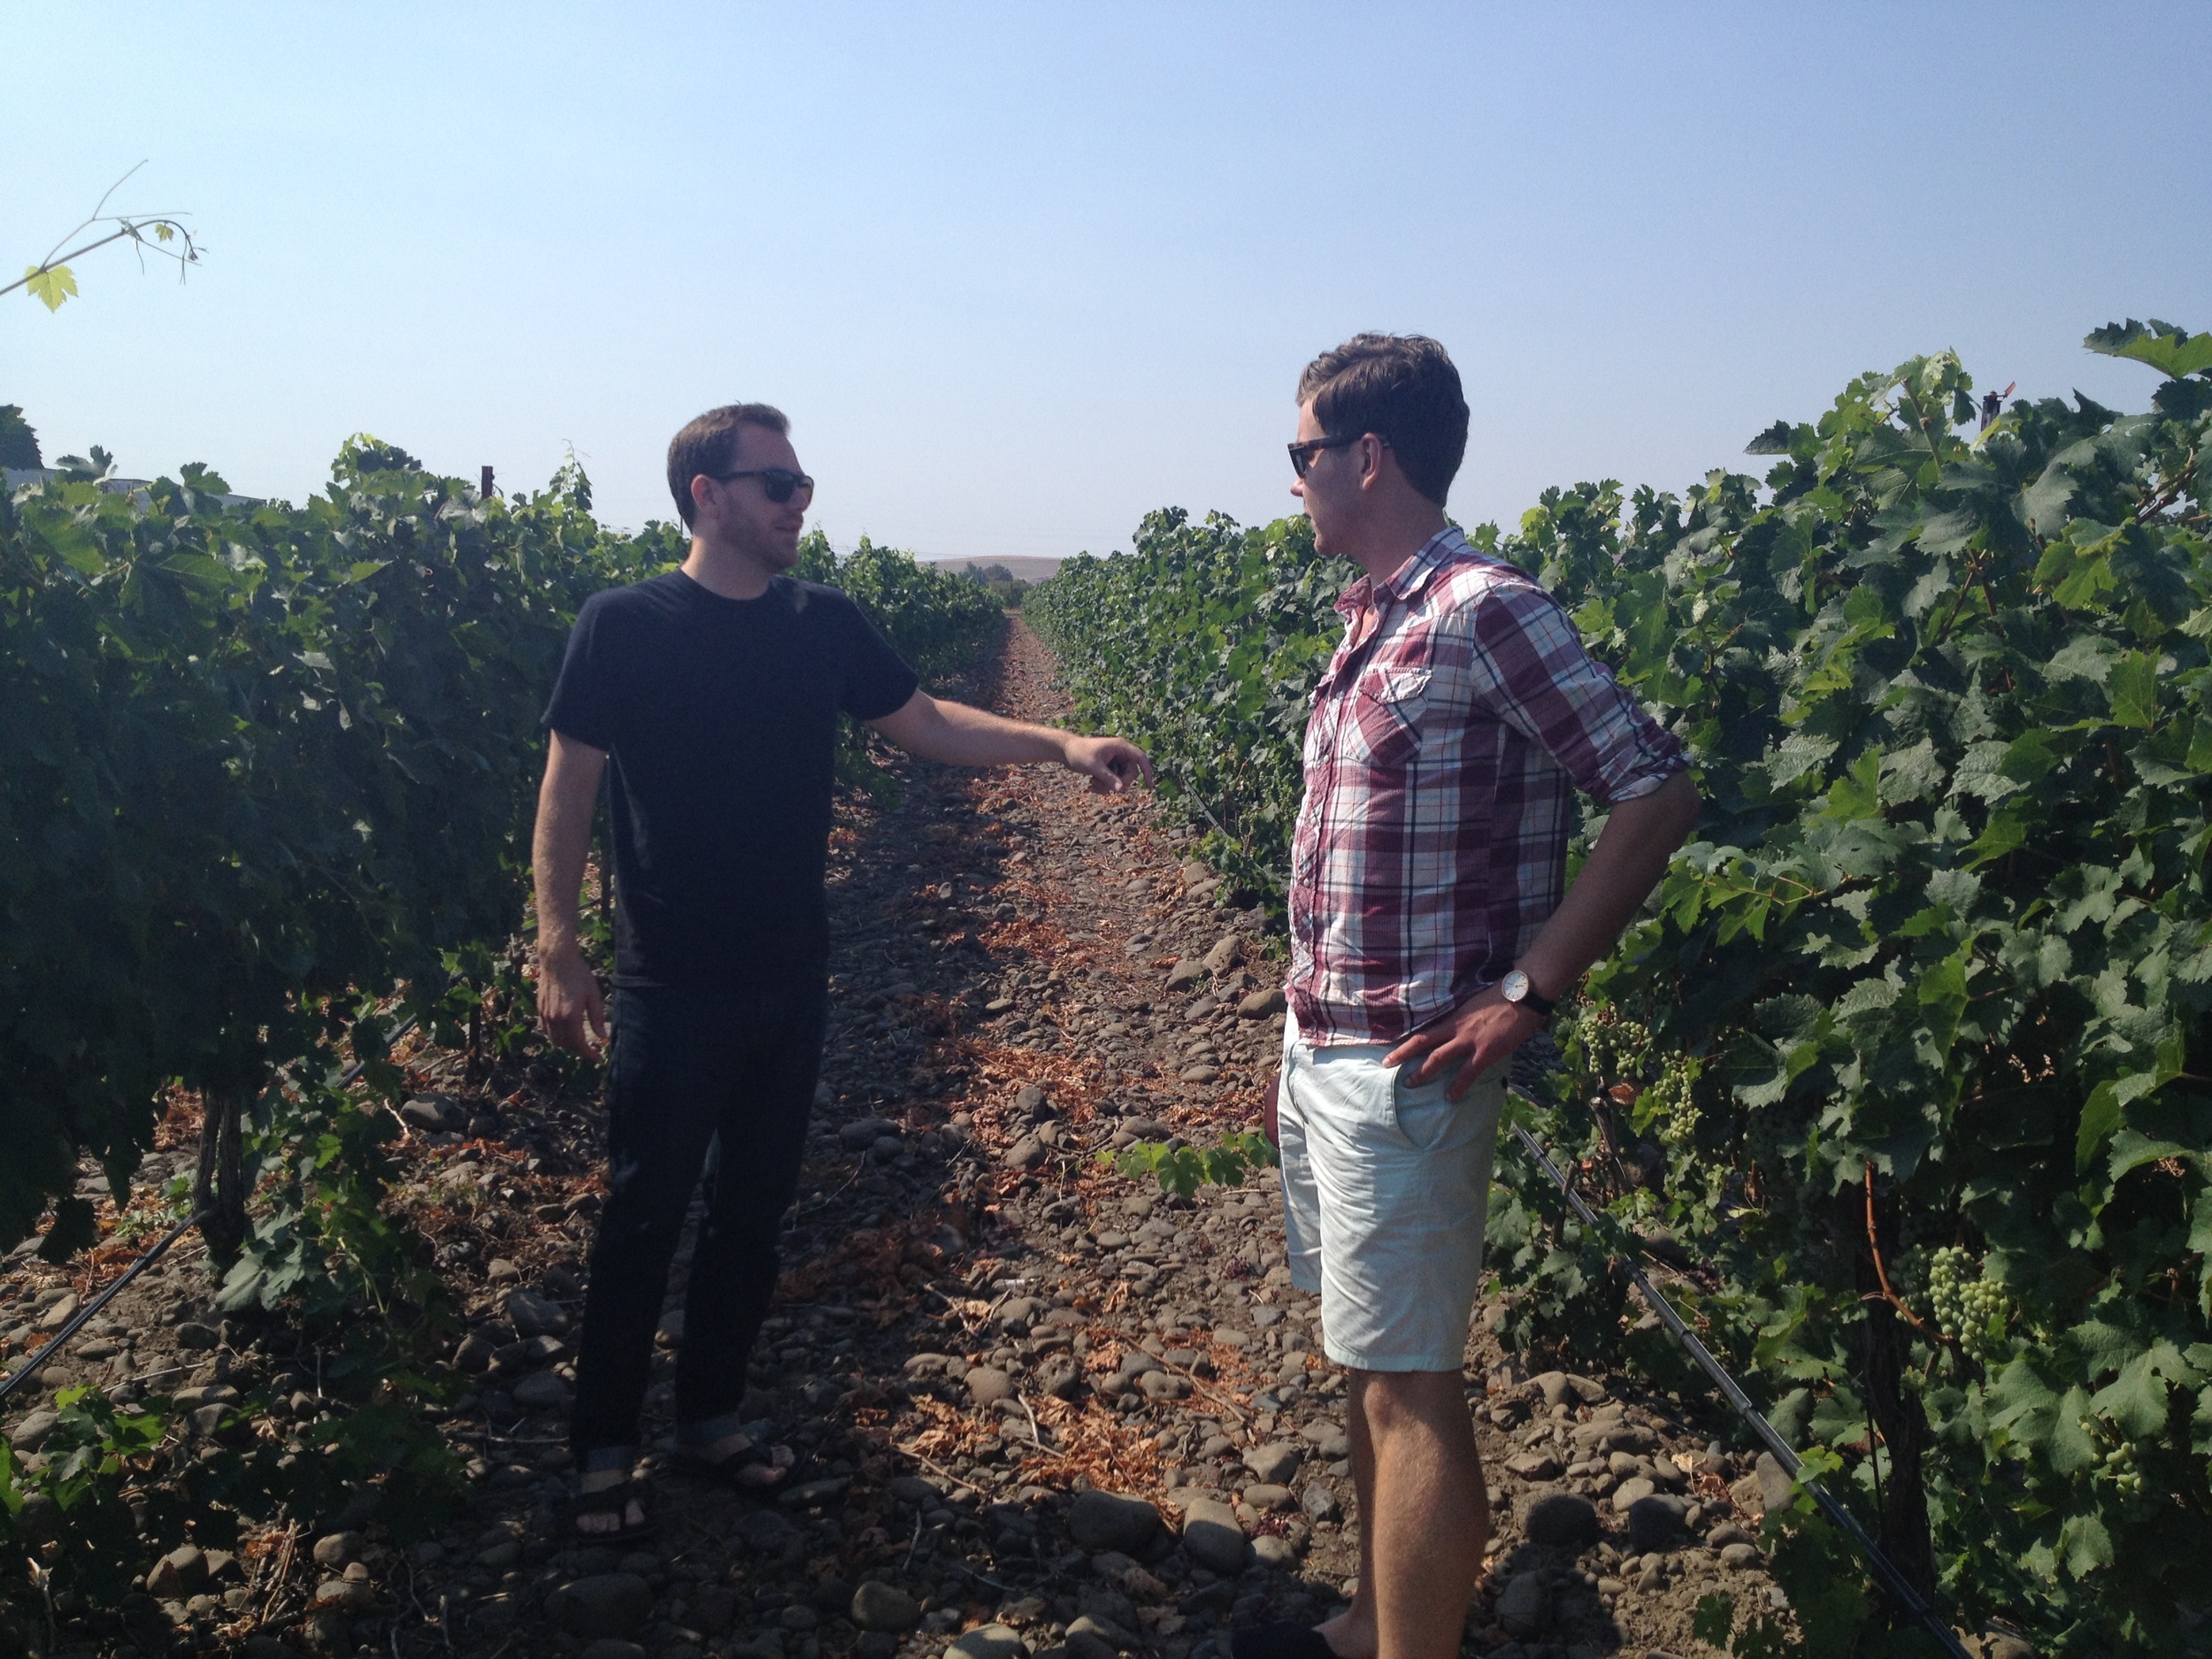  Checking out the rocks vineyard Syrah with Andrew Latta.  